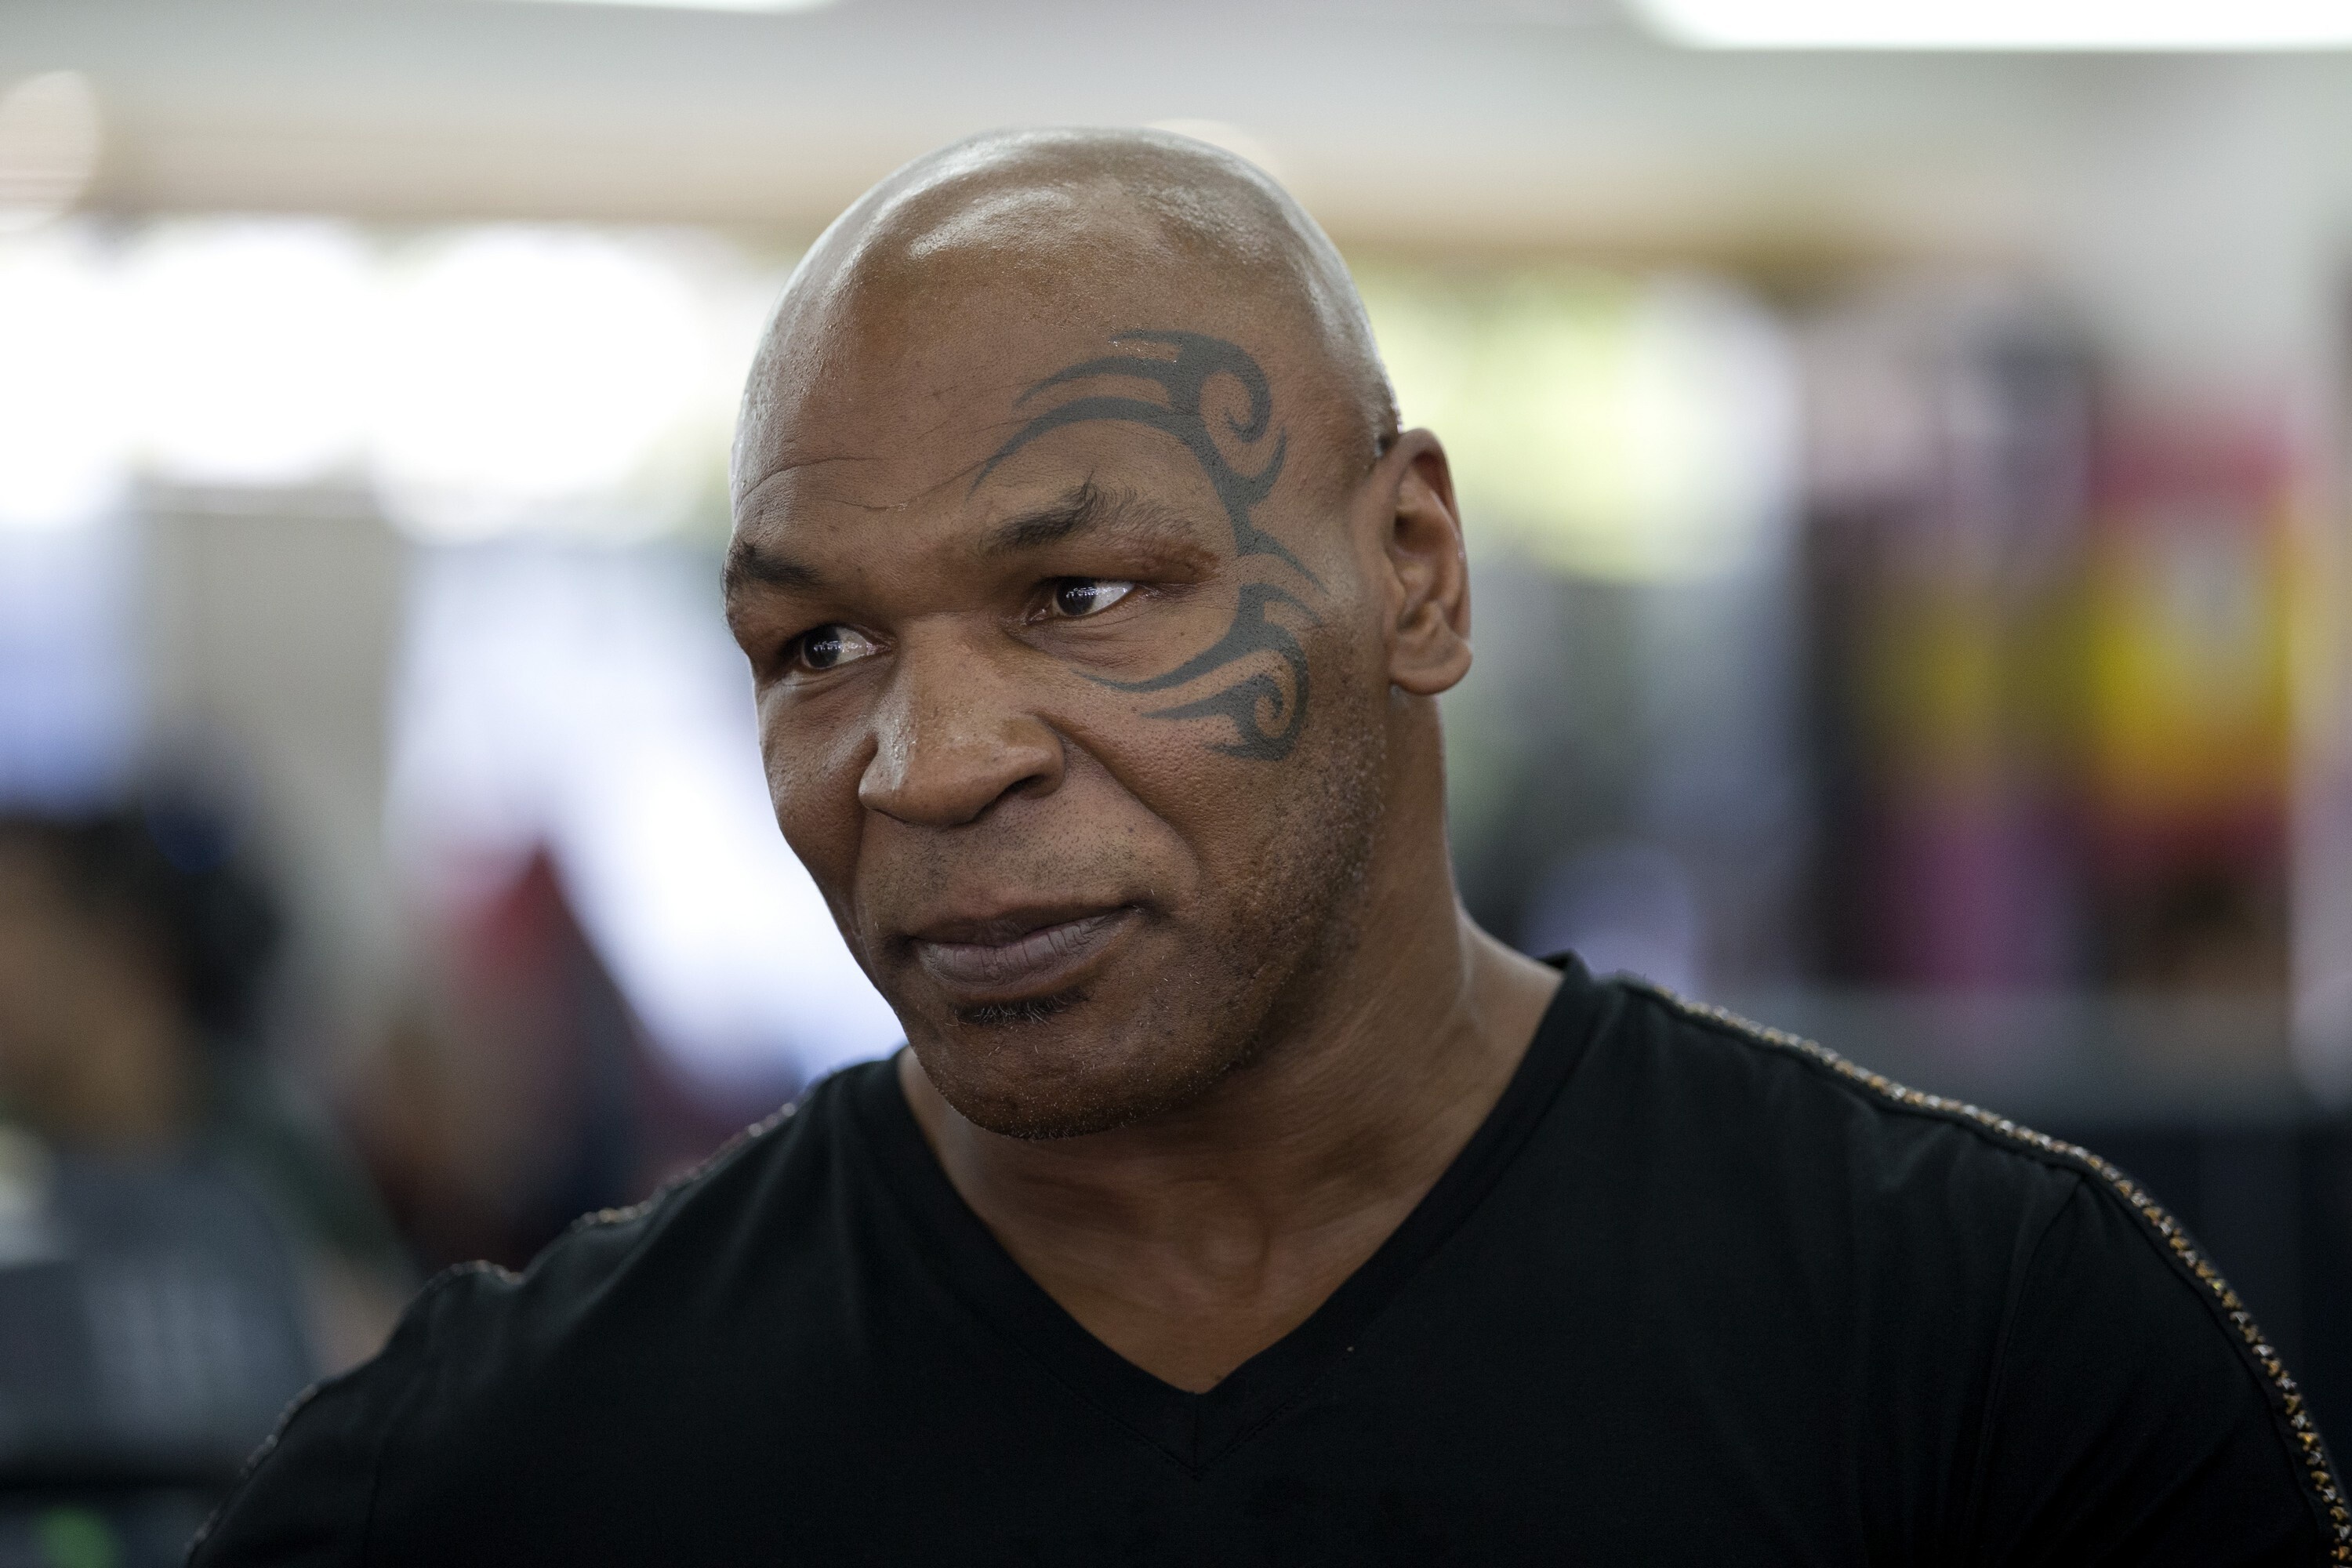 Mike Tyson, Dominant force, Intensity personified, Boxing phenom, 3000x2000 HD Desktop